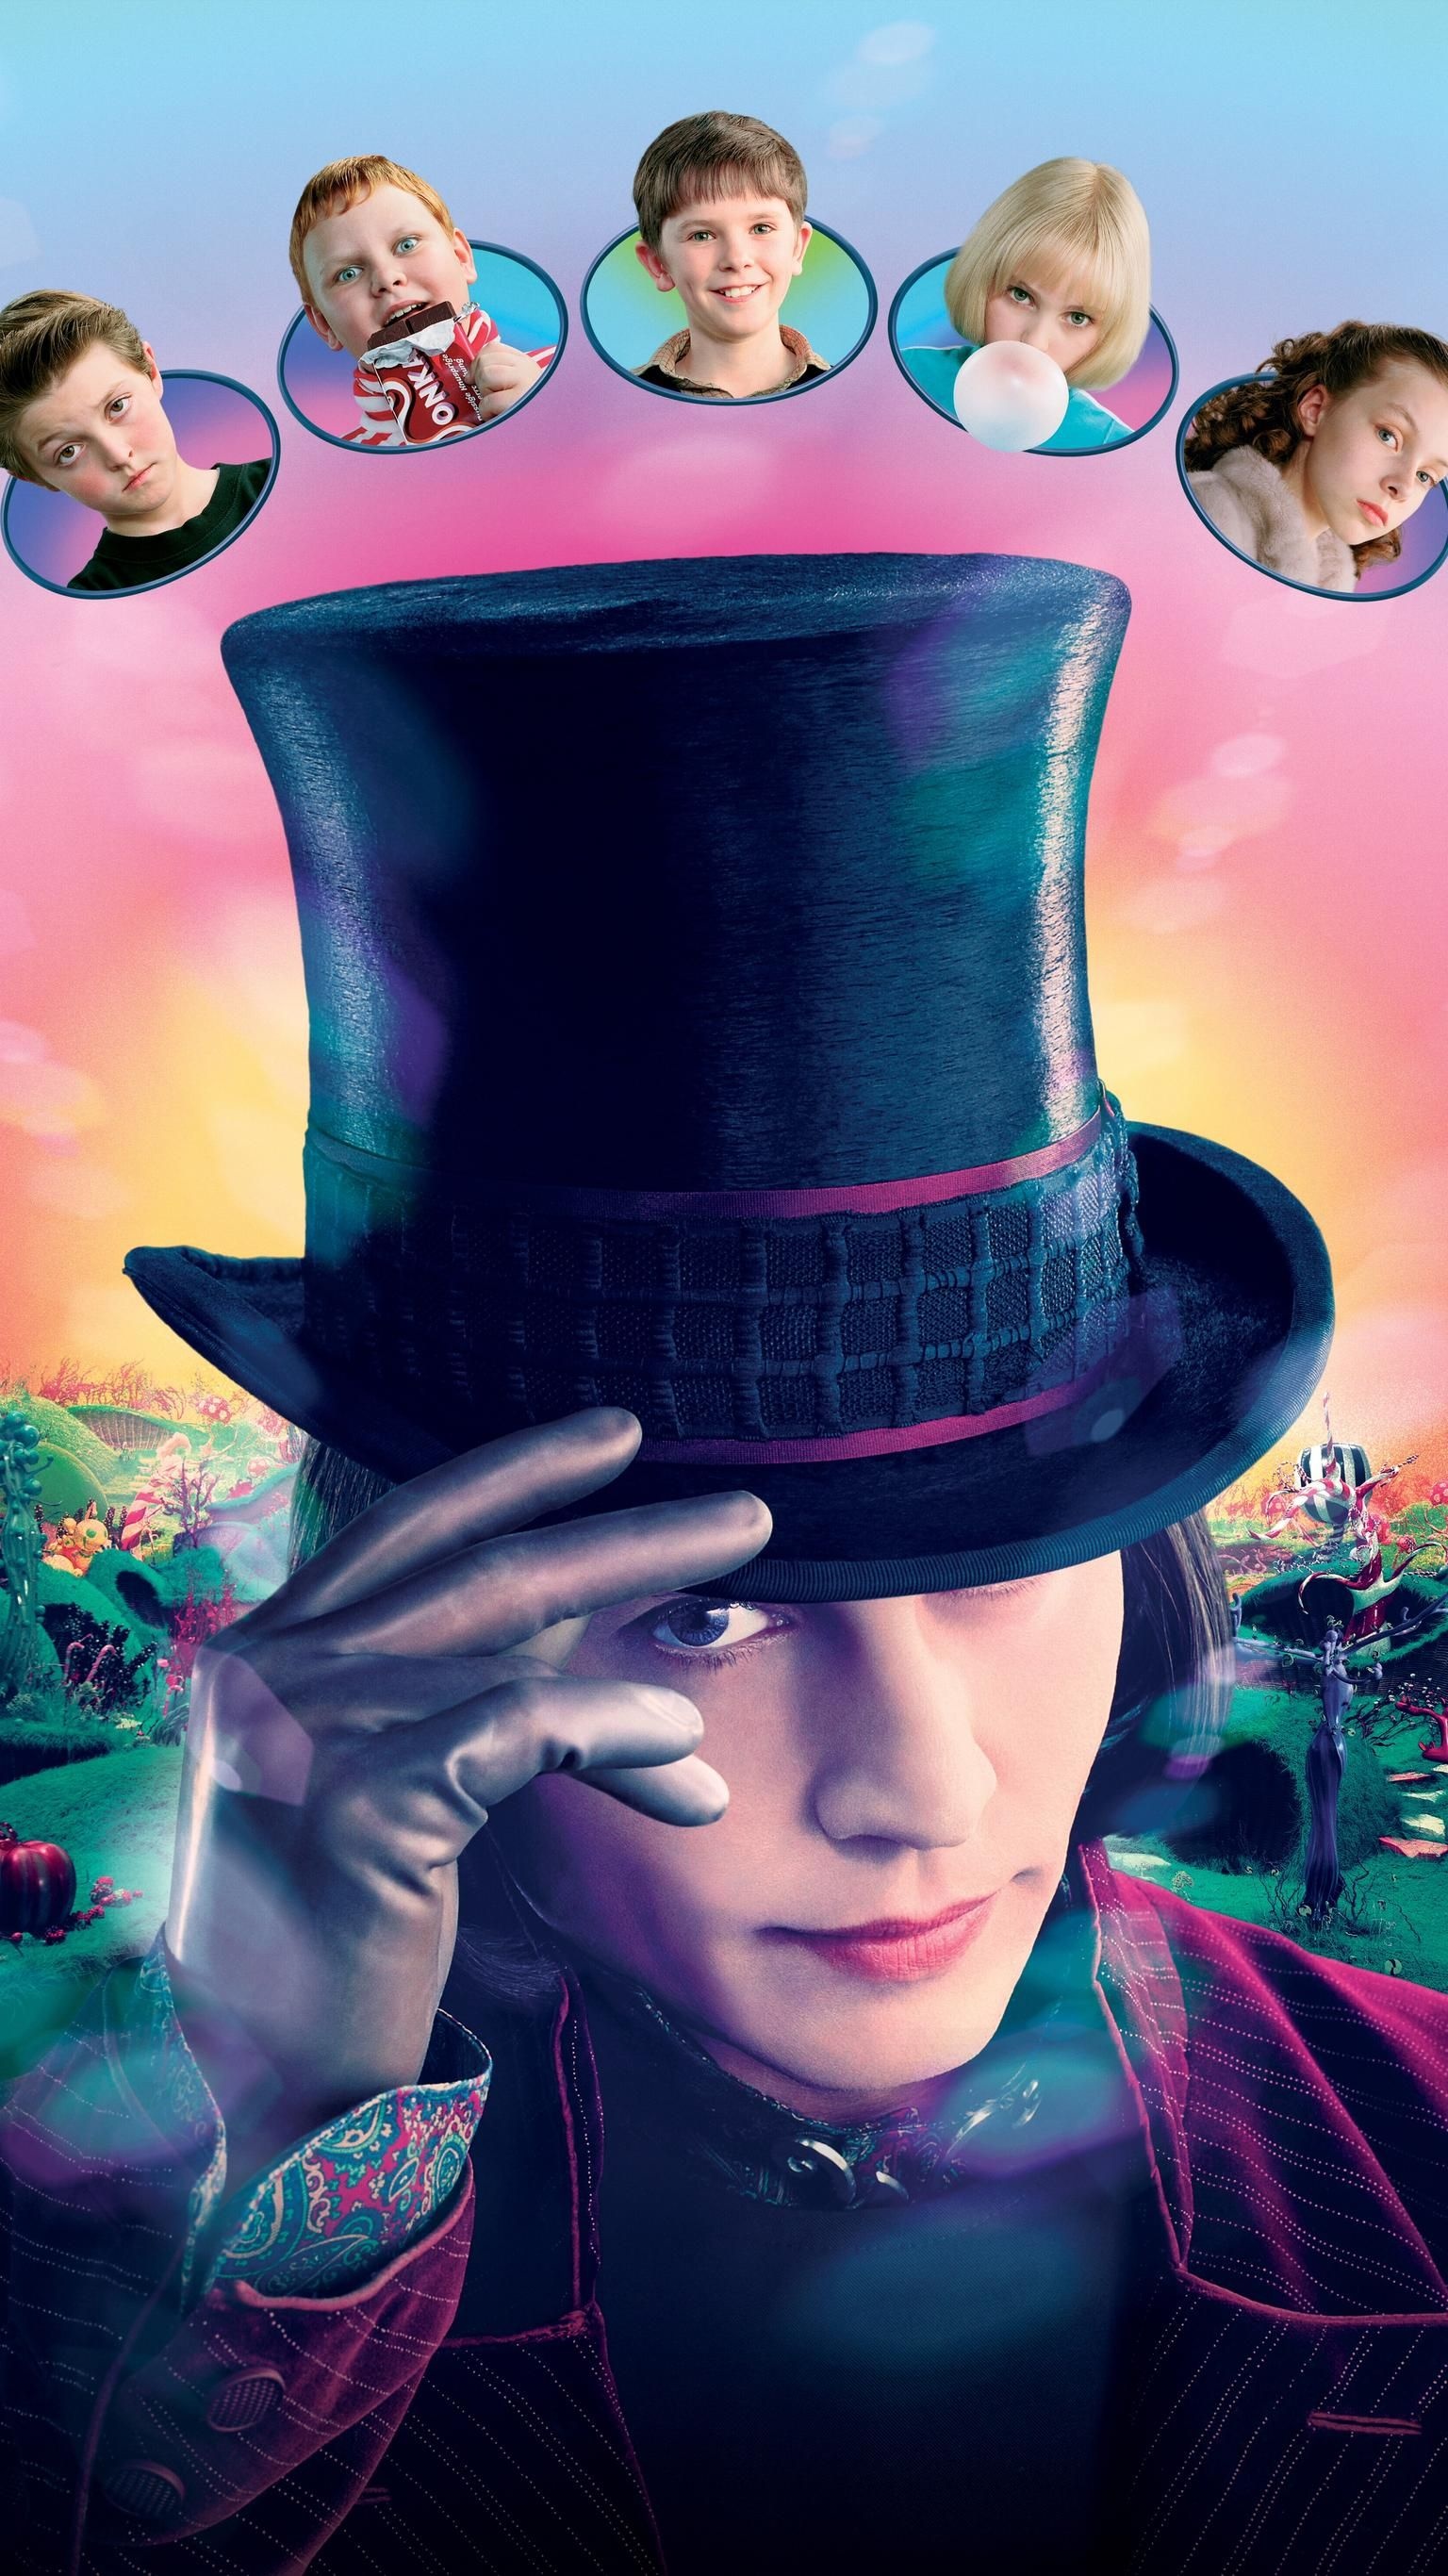 Charie and the Chocolate Factory, Phone wallpaper, Johnny Depp, Family movies, 1540x2740 HD Handy